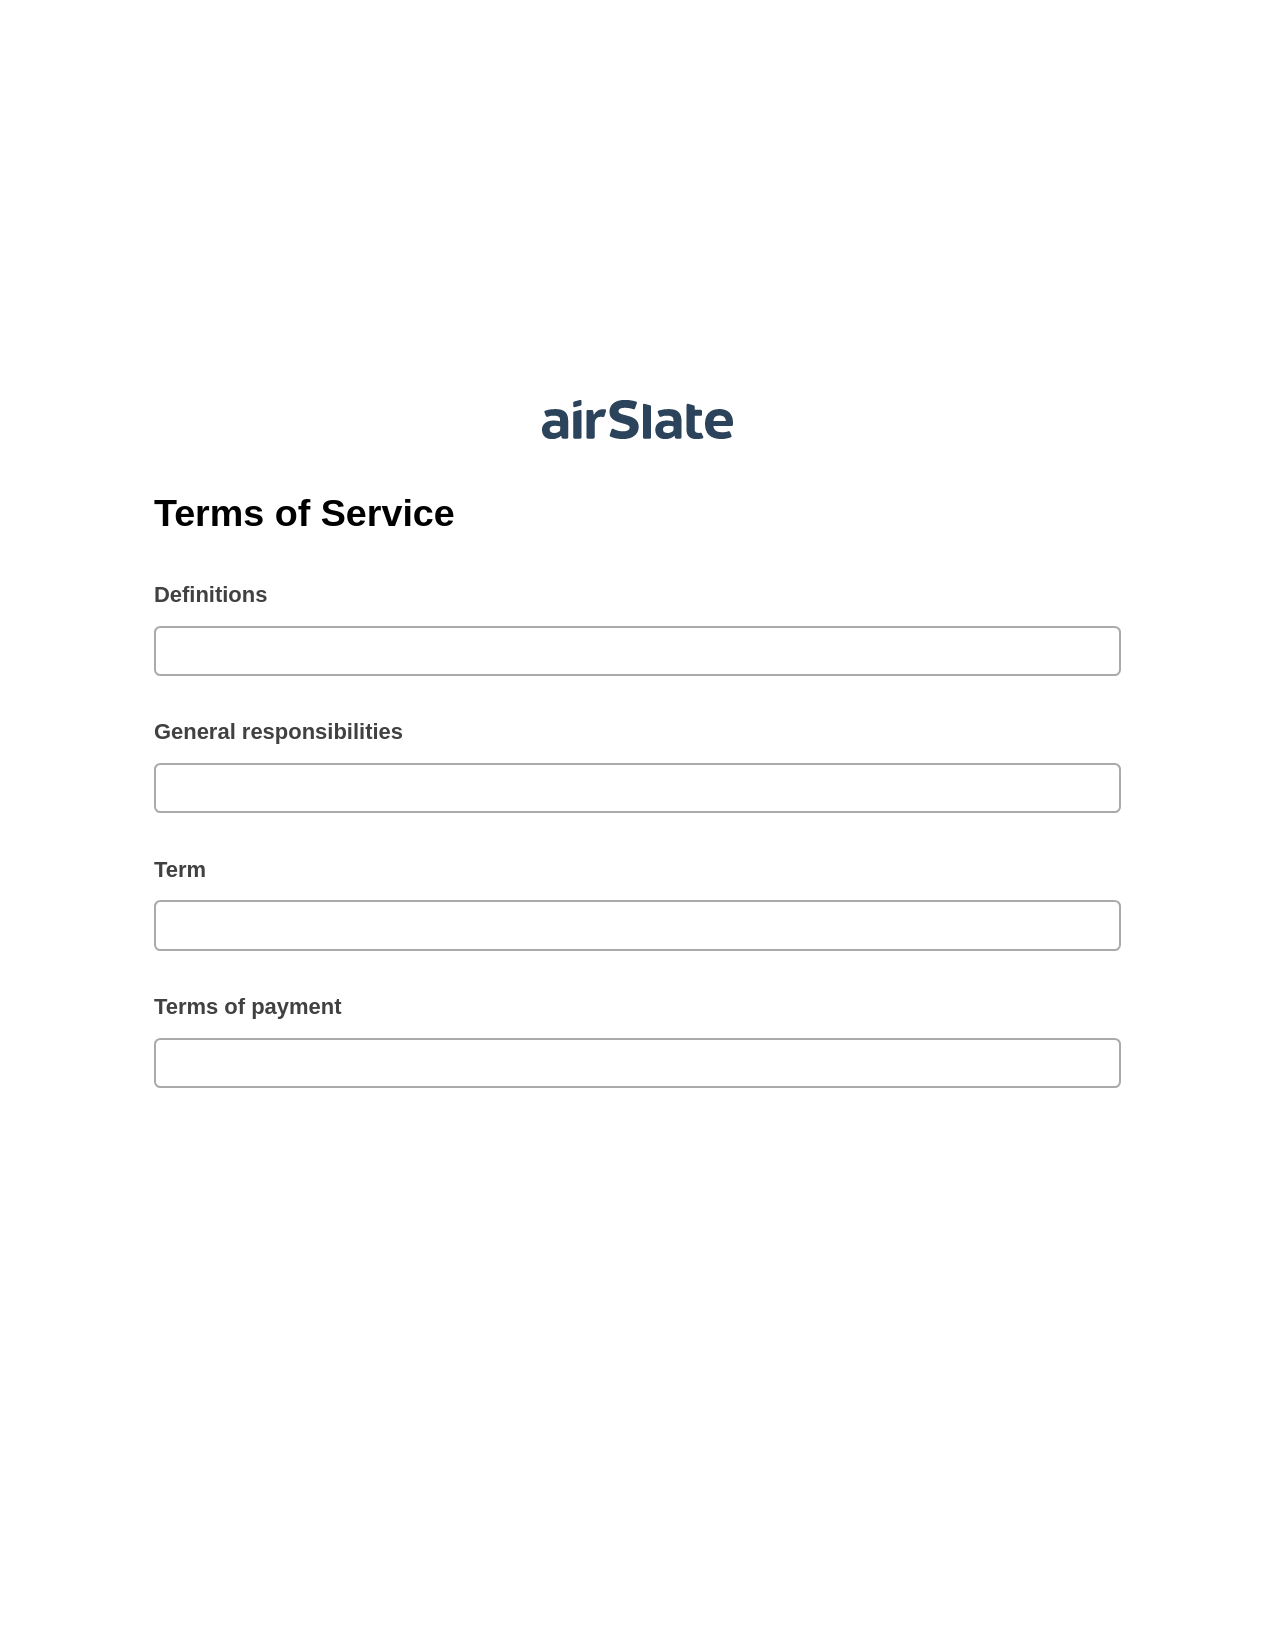 Terms of Service Pre-fill Slate from MS Dynamics 365 Records Bot, Export to MS Dynamics 365 Bot, Box Bot